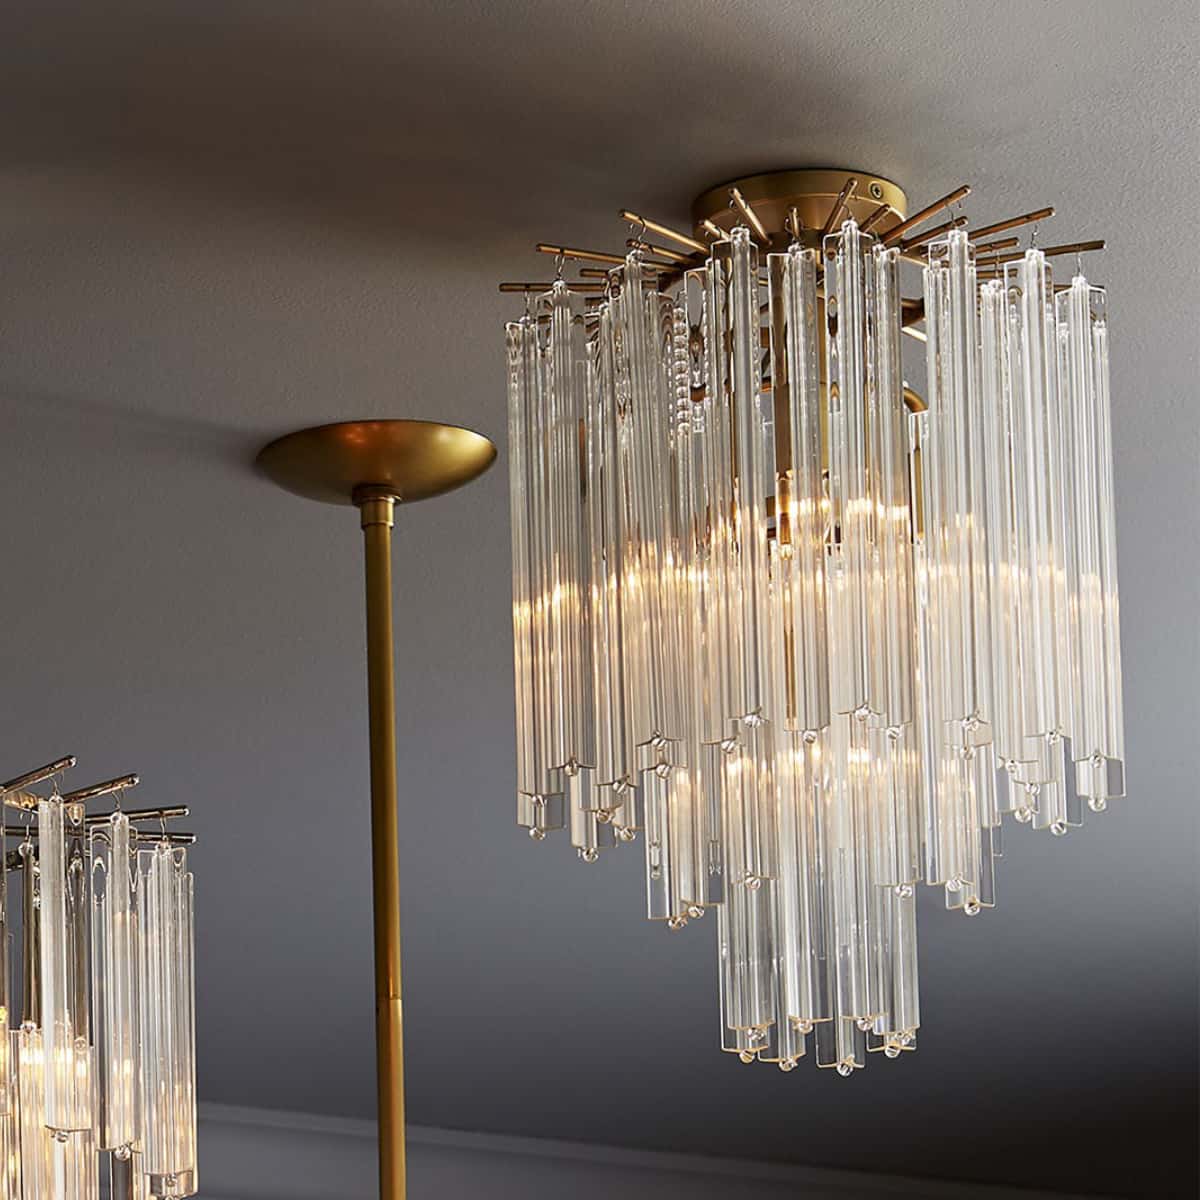 Bright chandelier tips and types